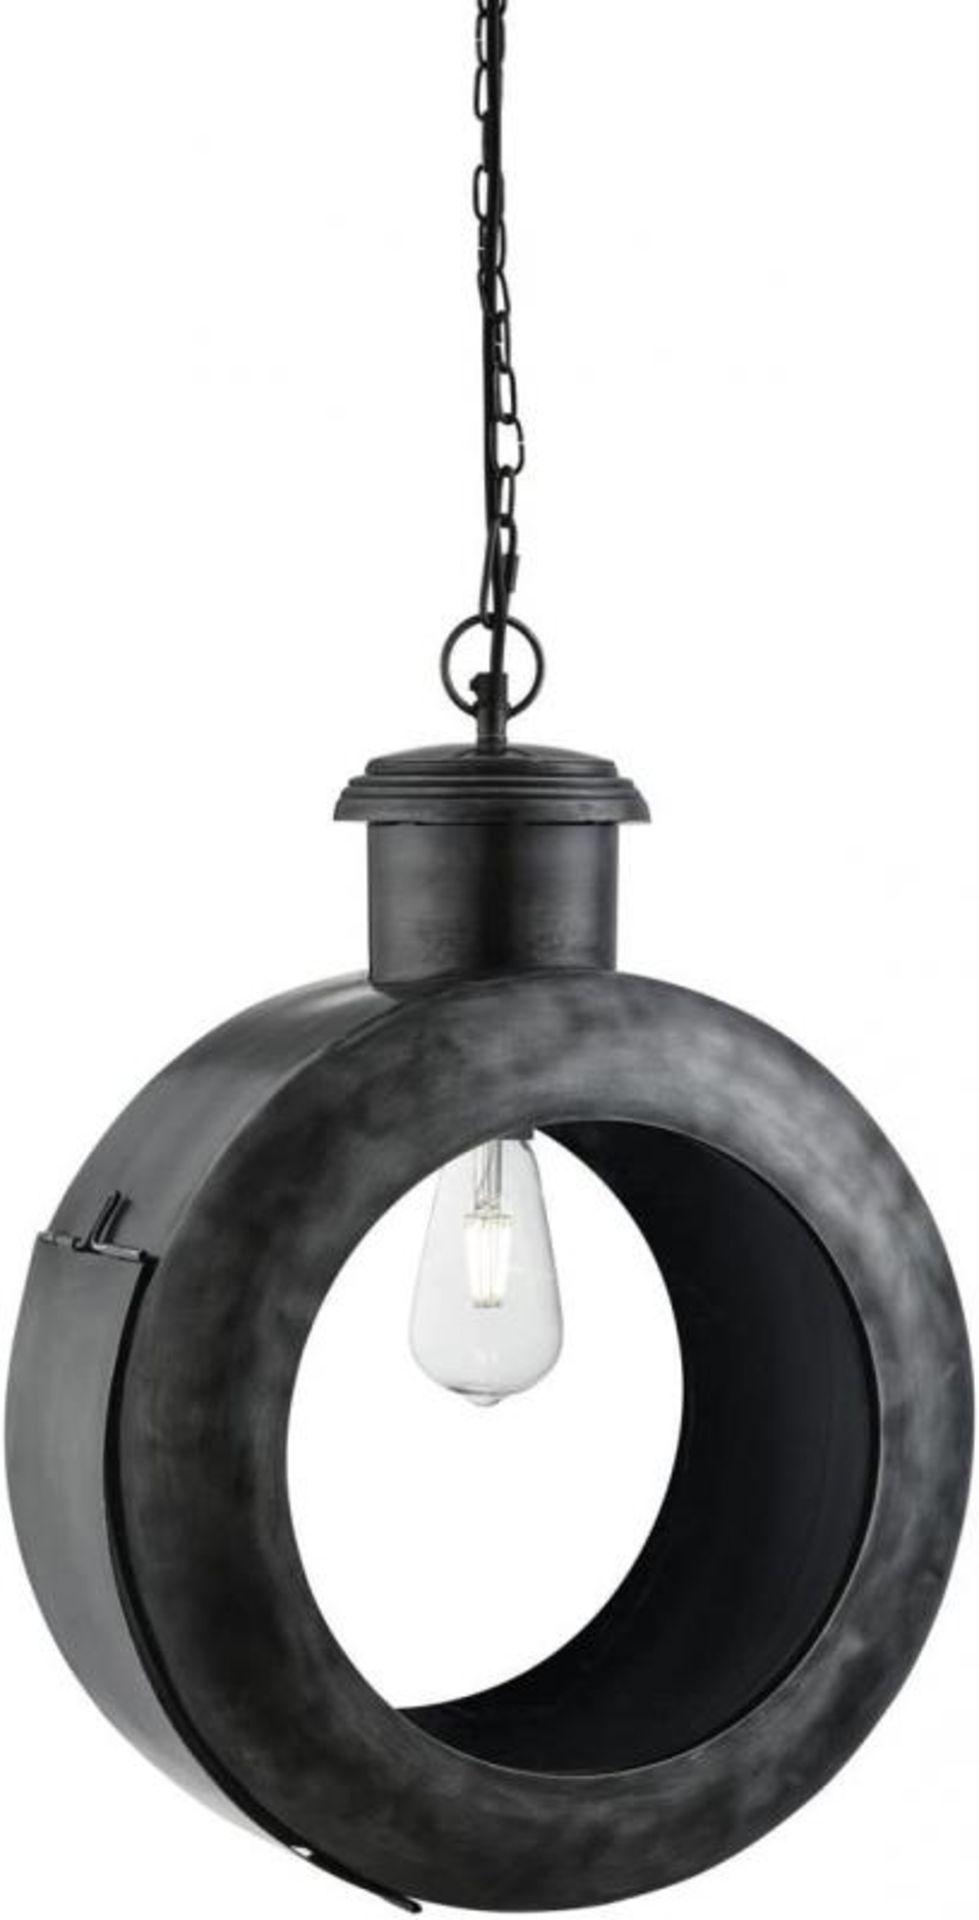 1 x Large Port-Hole 1 Light Pendant Large With An Antique Zinc Finish - New Boxed Stock - WH1 AA5 - - Image 2 of 2